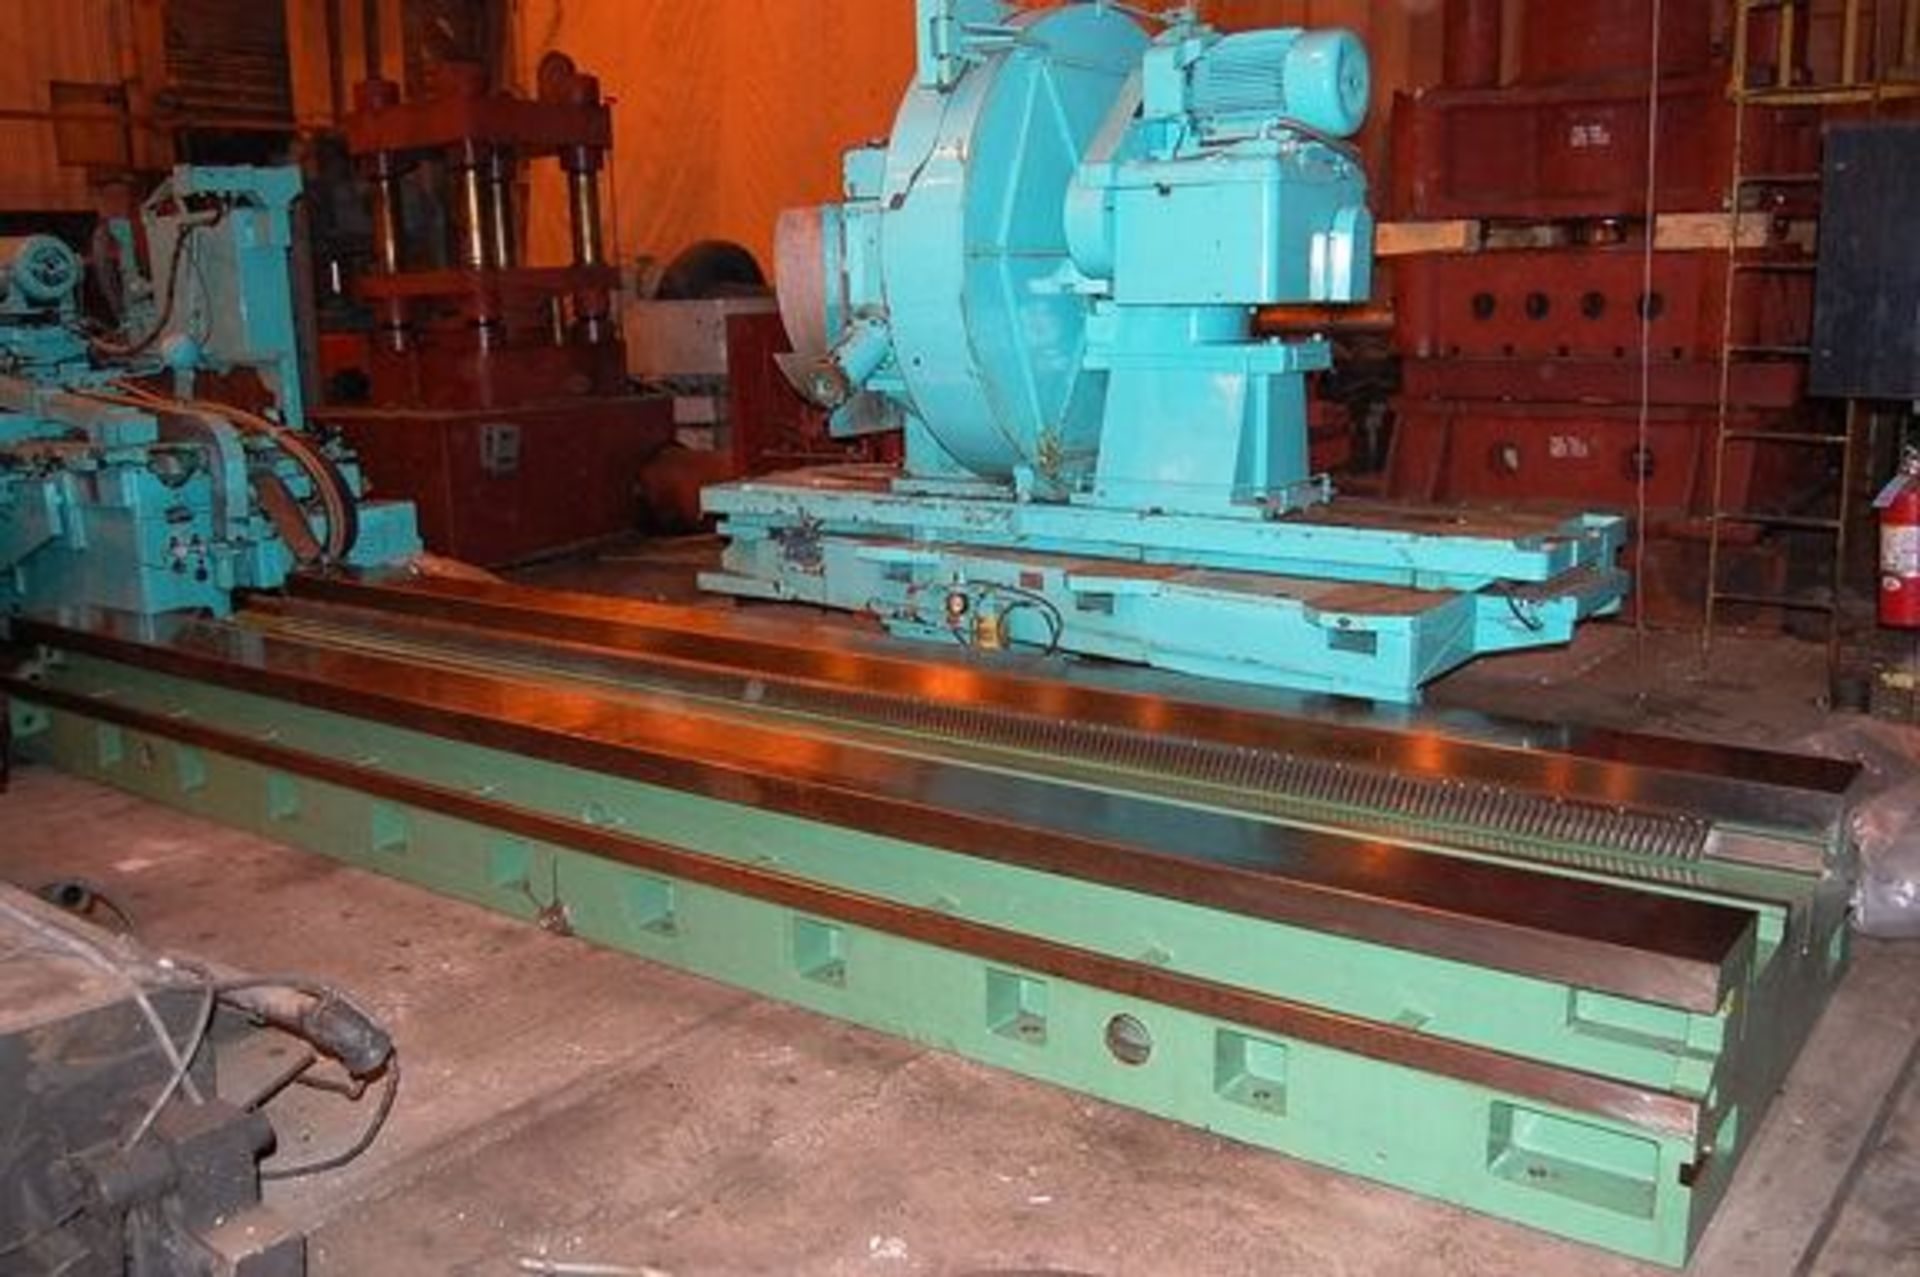 FPT Horizontal Boring Mill Bed Section New, Never Used - Image 3 of 6